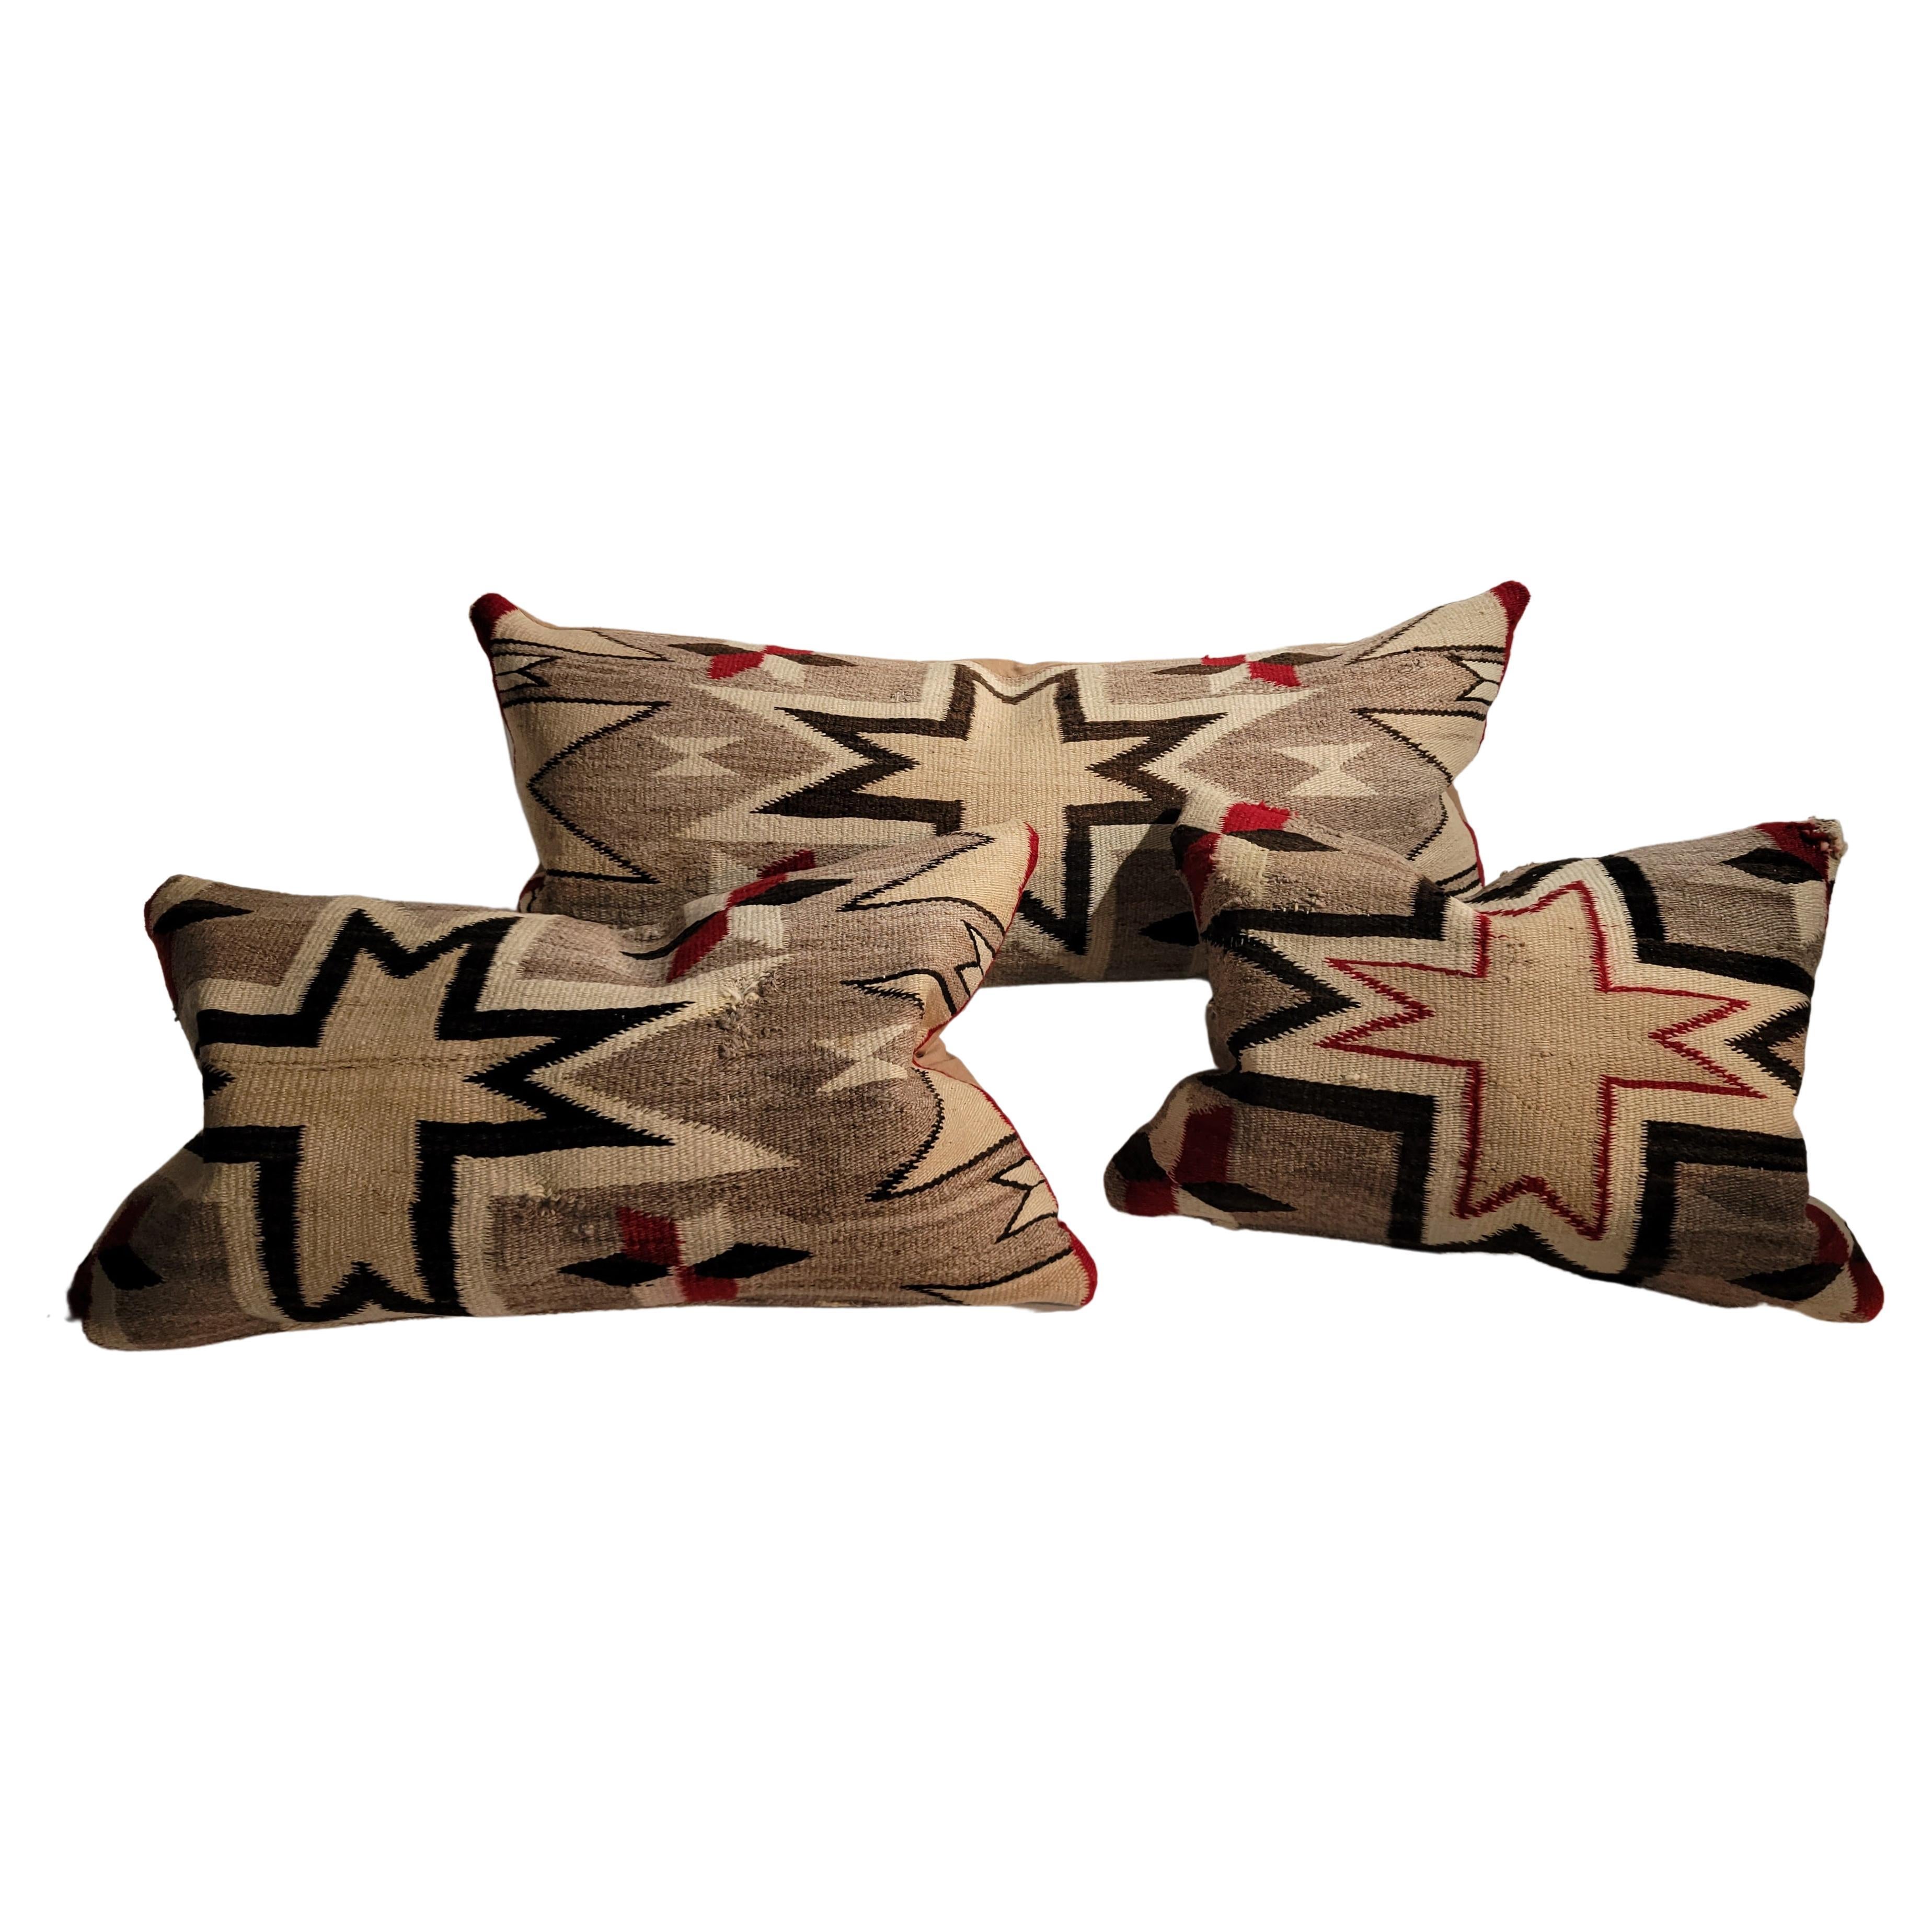 Collection of Feather Star Navajo Indian Weaving Pillows -3 For Sale